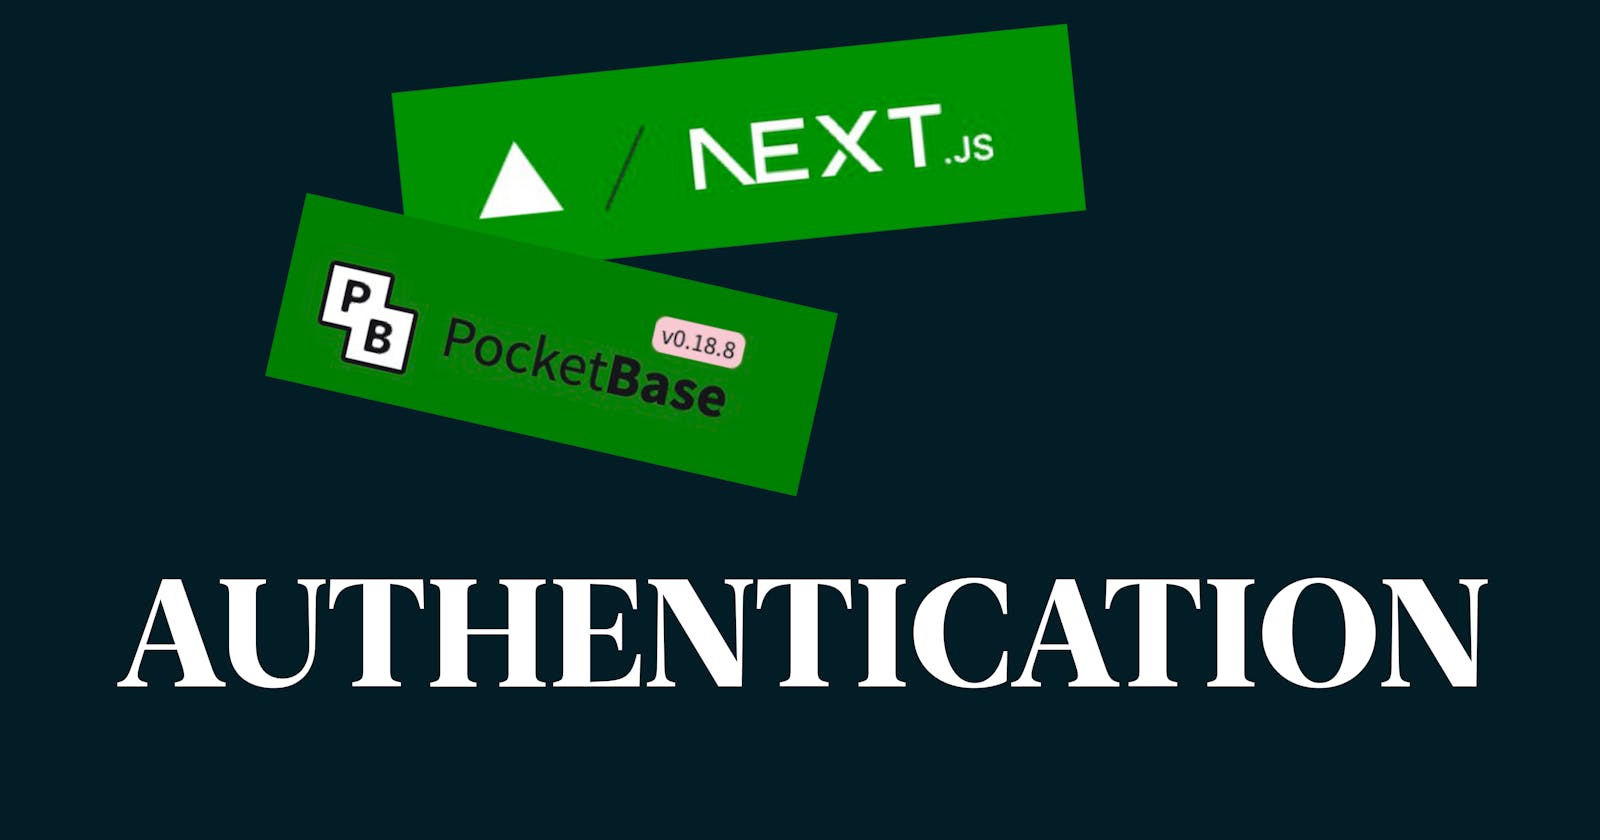 Setting up Next.JS and PocketBase for Authentication